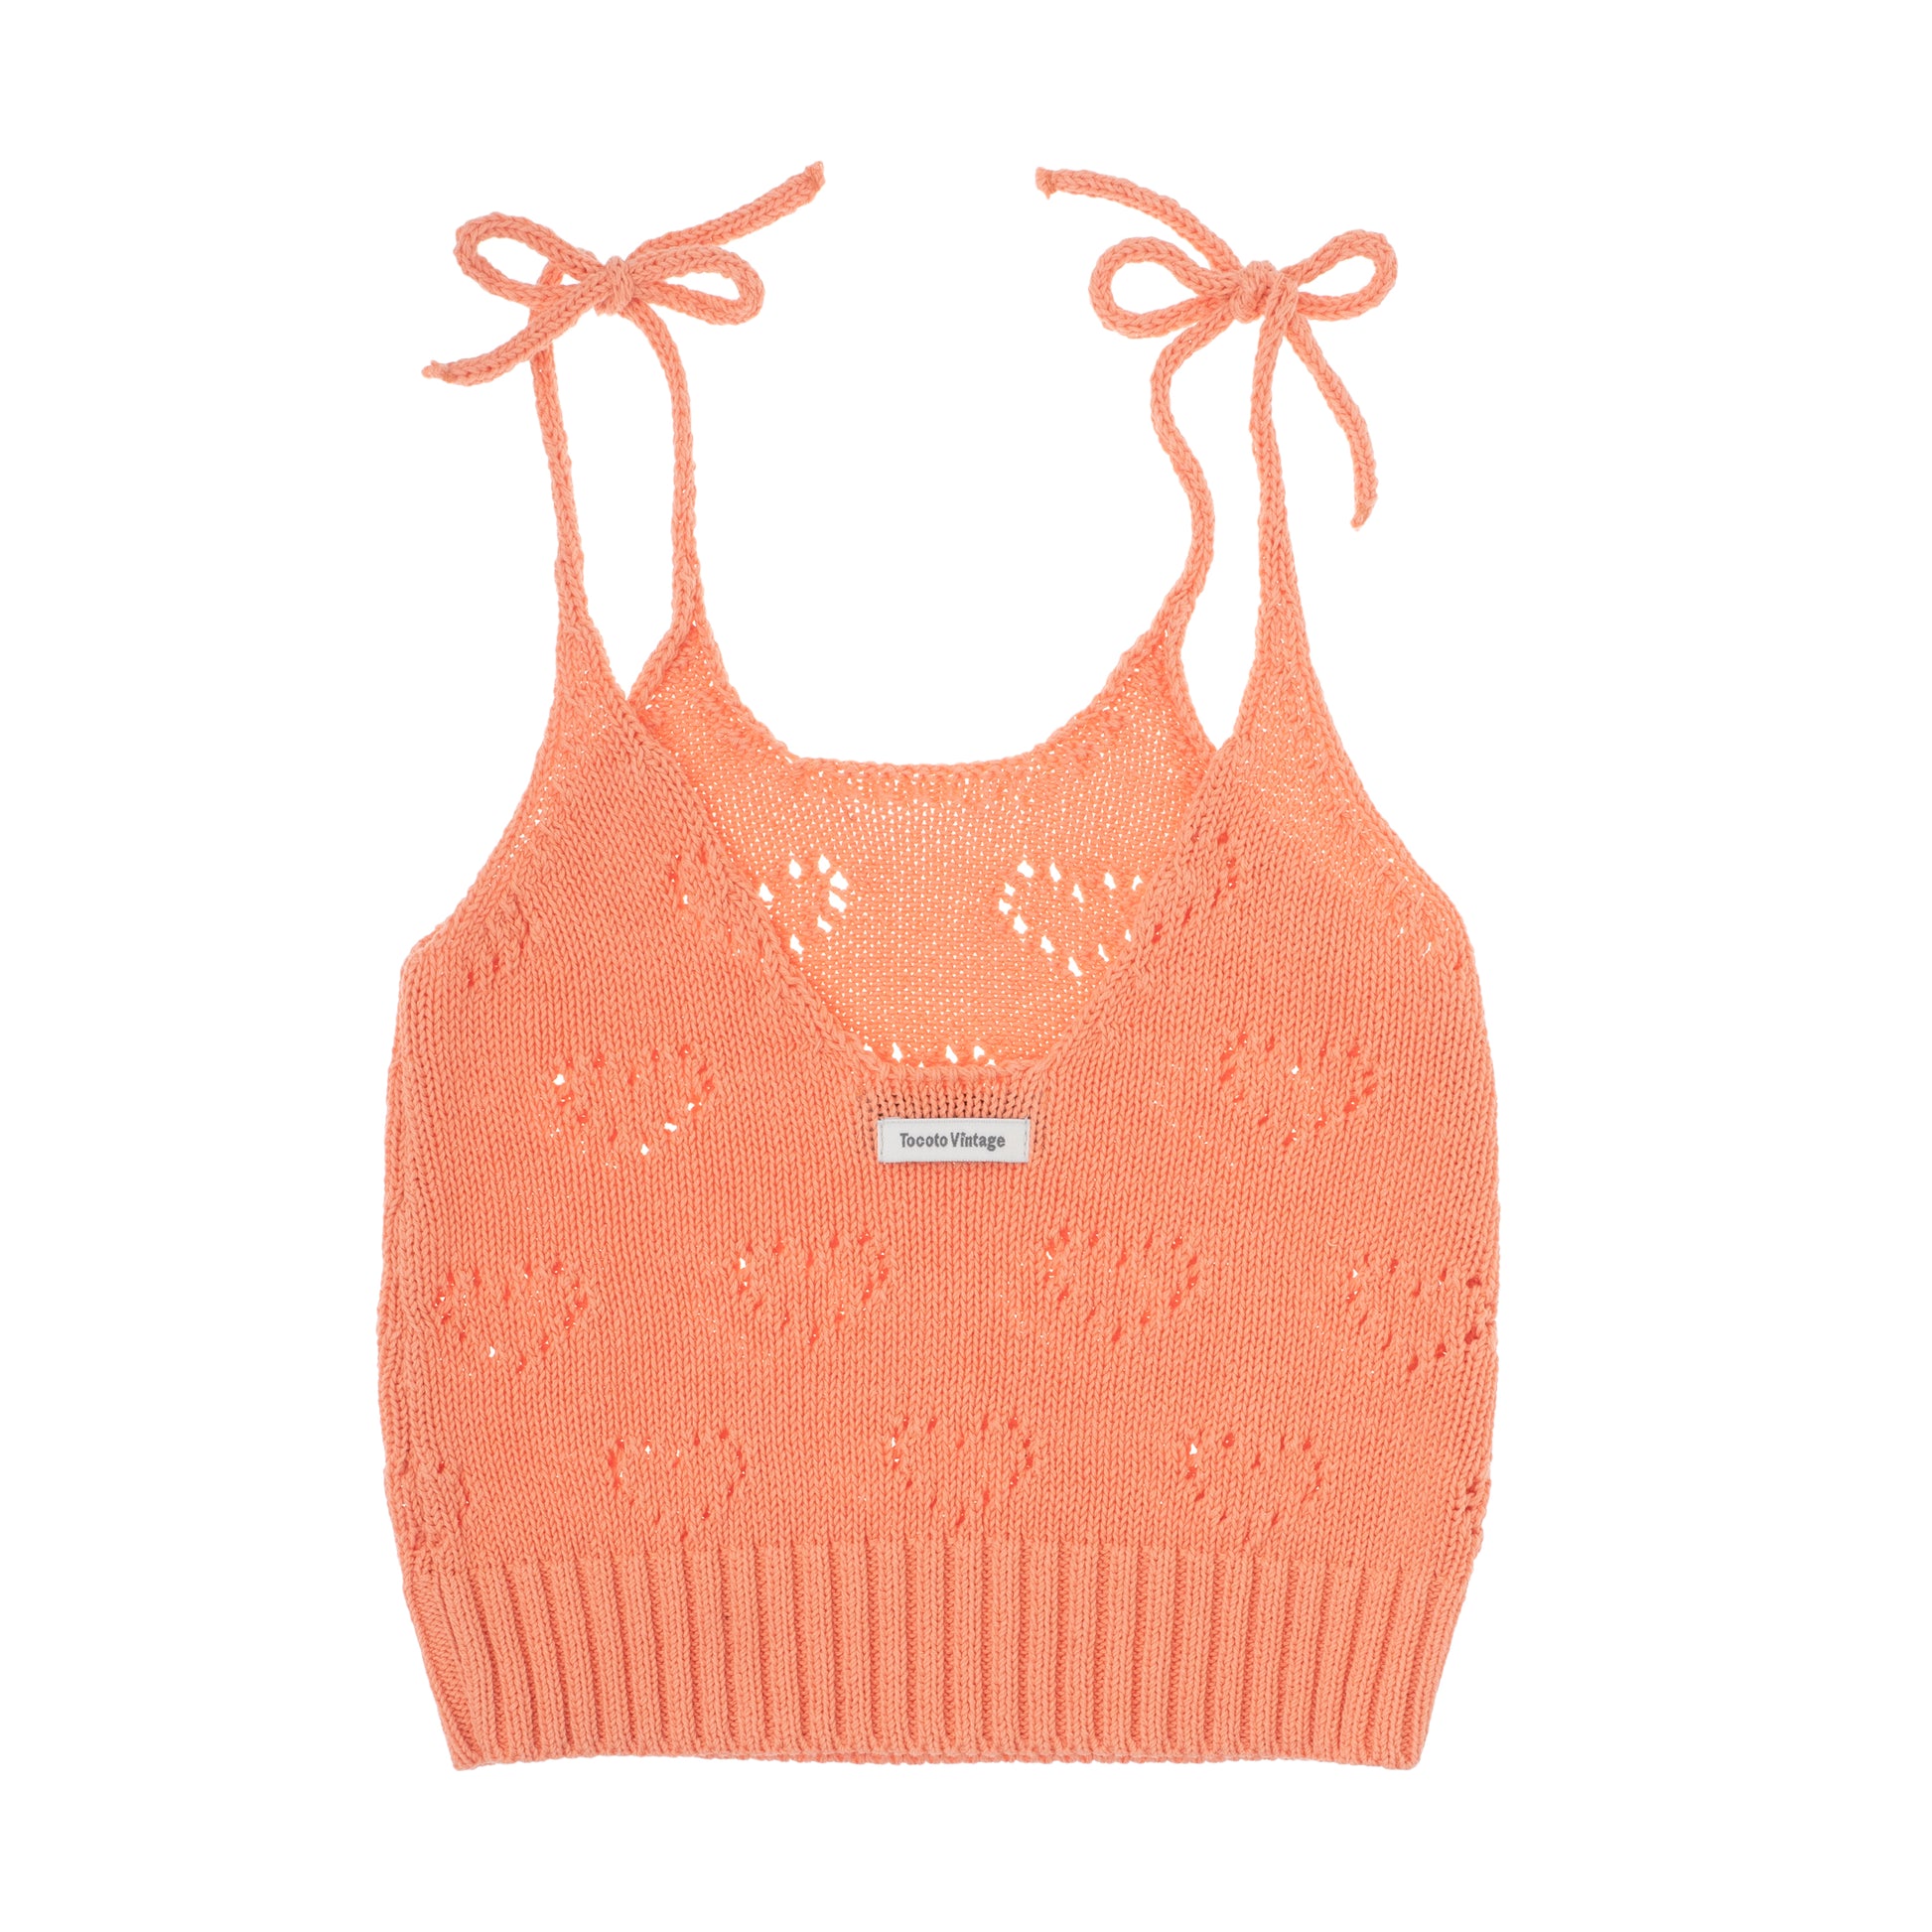 Tocoto Vintage Knitted Heart Top - Meisjes - Roze2